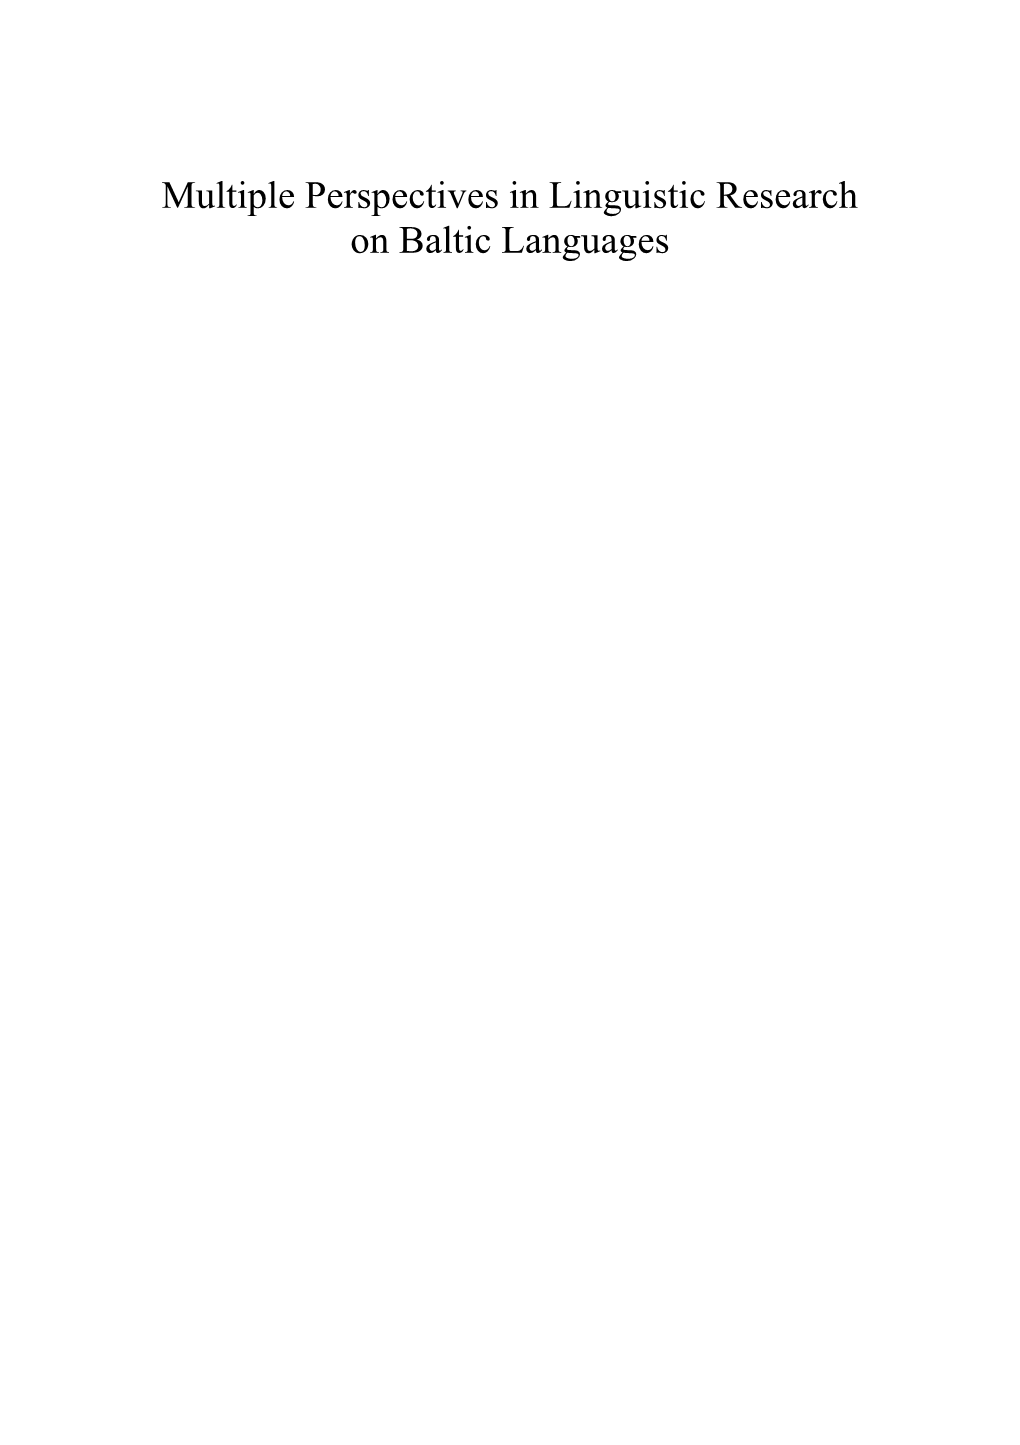 Multiple Perspectives in Linguistic Research on Baltic Languages